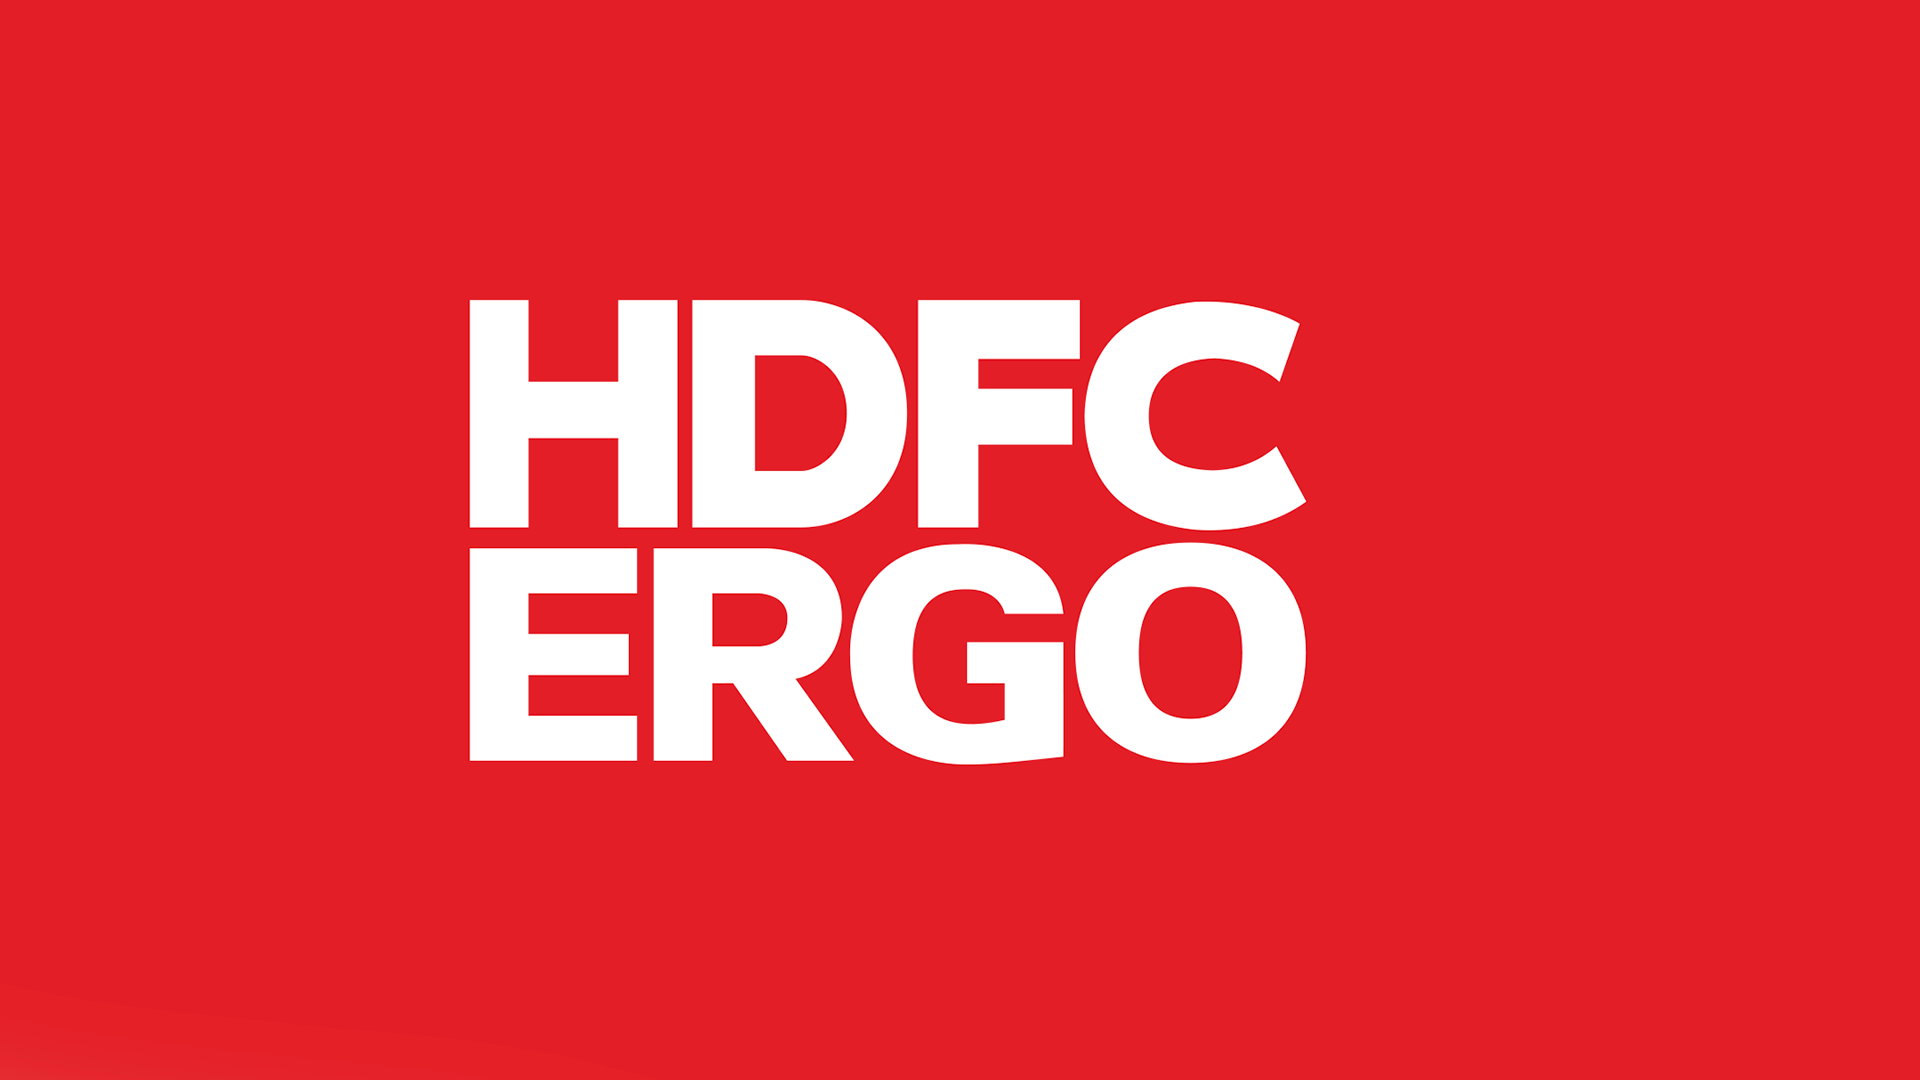 Repudiation Based On Inconclusive Diagnosis, Chandigarh District Commission Holds HDFC Ergo Health Insurance Liable